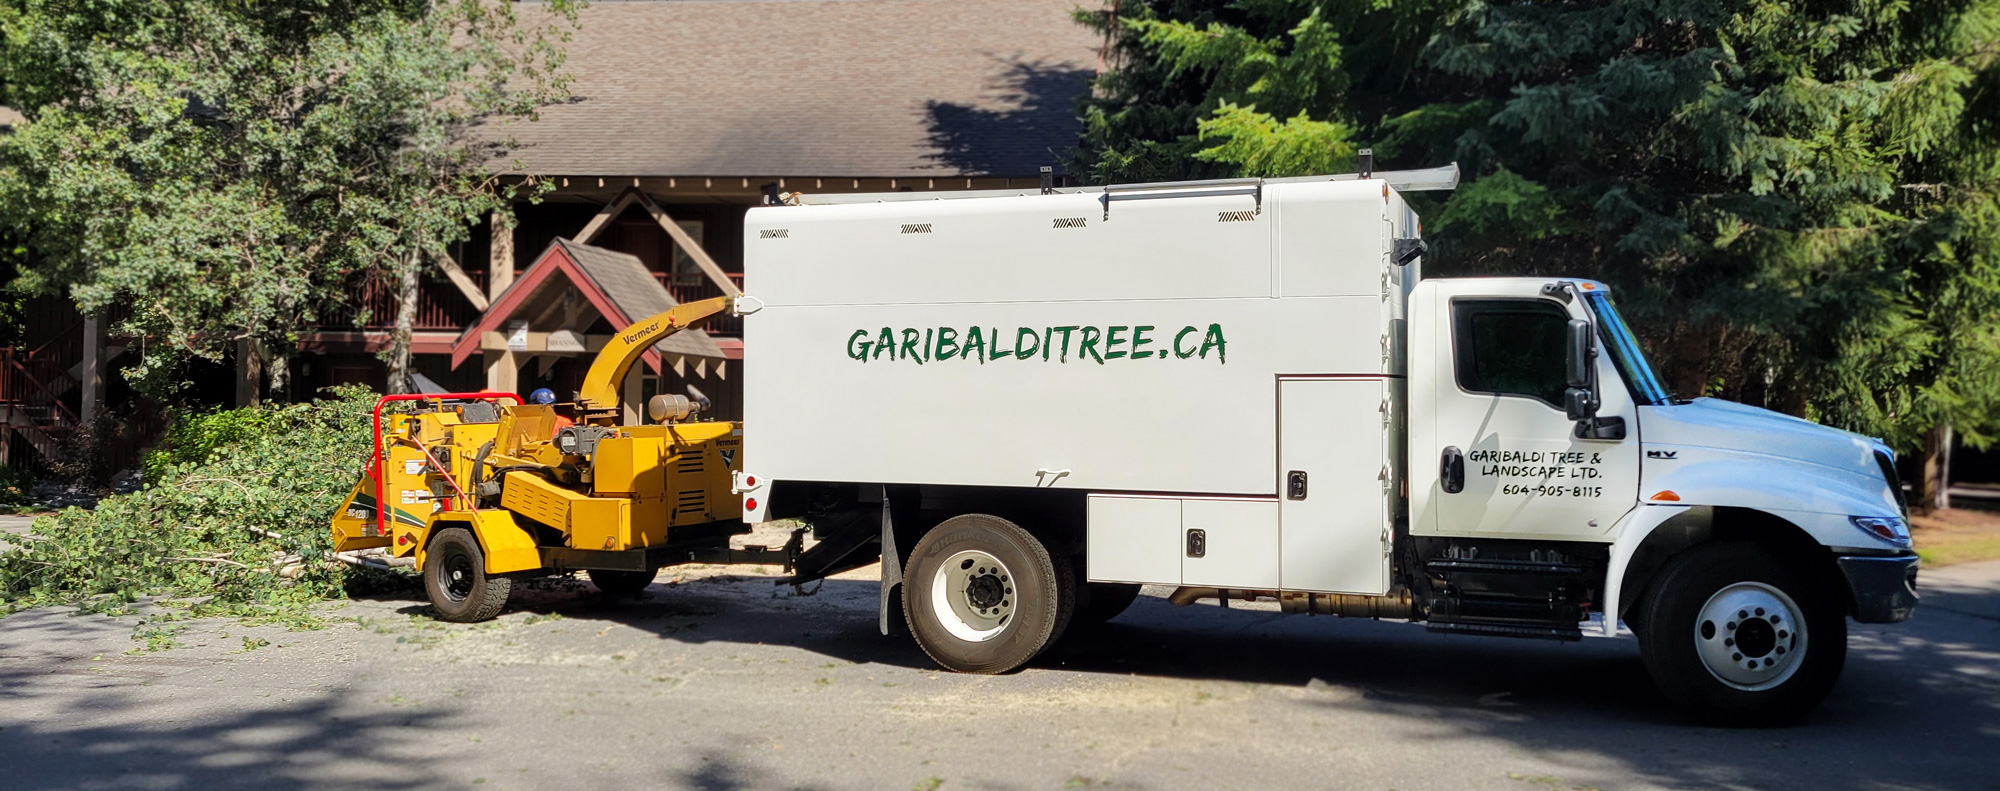 The Garibaldi Tree work truck outside a building in Whistler, B.C. The truck is a white dump truck with "garibalditree.ca" across the side in green lettering. There is a yellow chipper attached to the truck, with some branches sticking out the back of it.